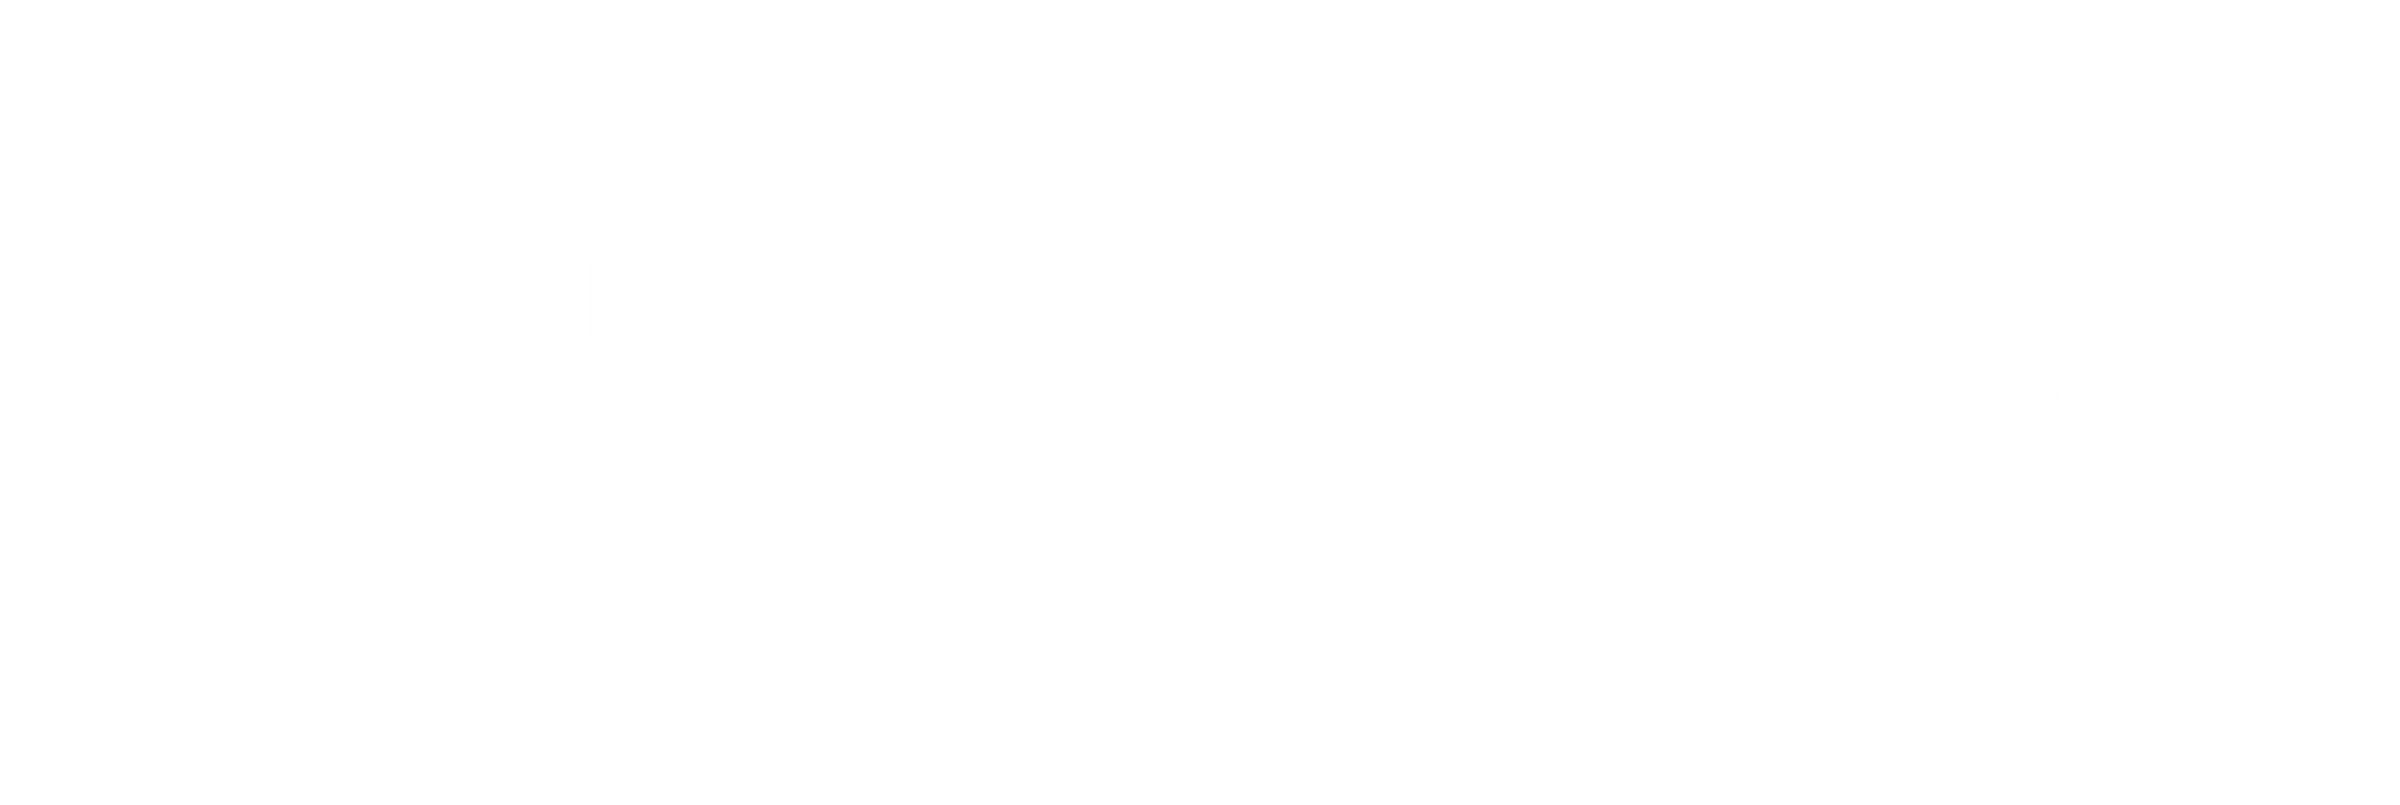 The Meatbox logo